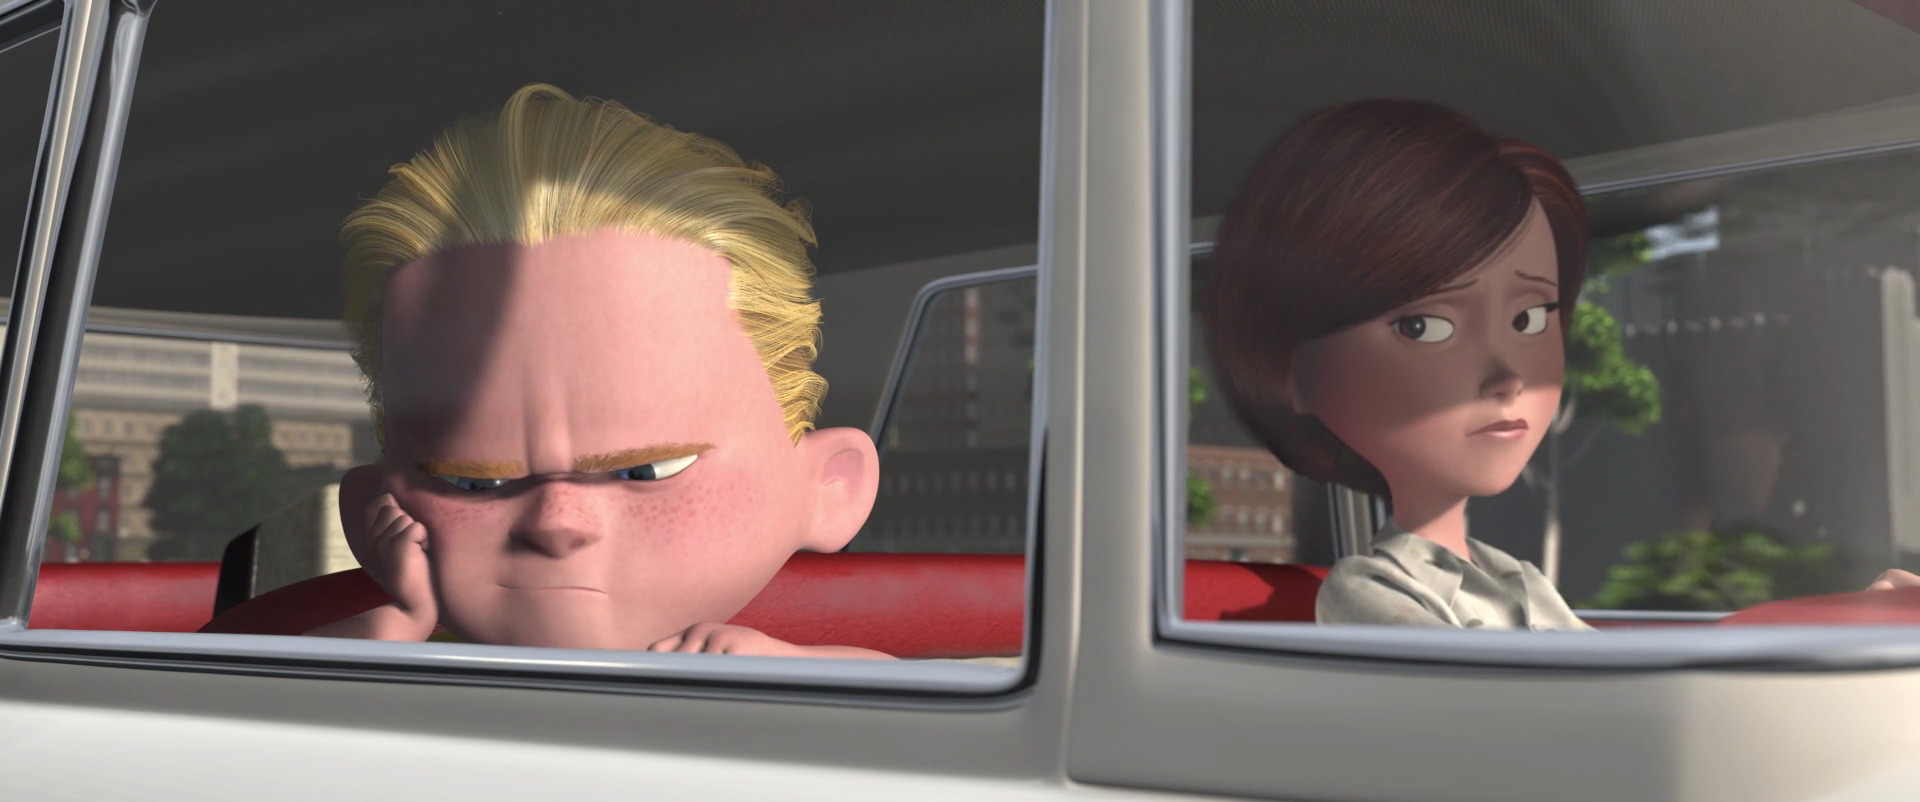 Every Five Minutes: The Incredibles (05:46-10:12) - Deadshirt